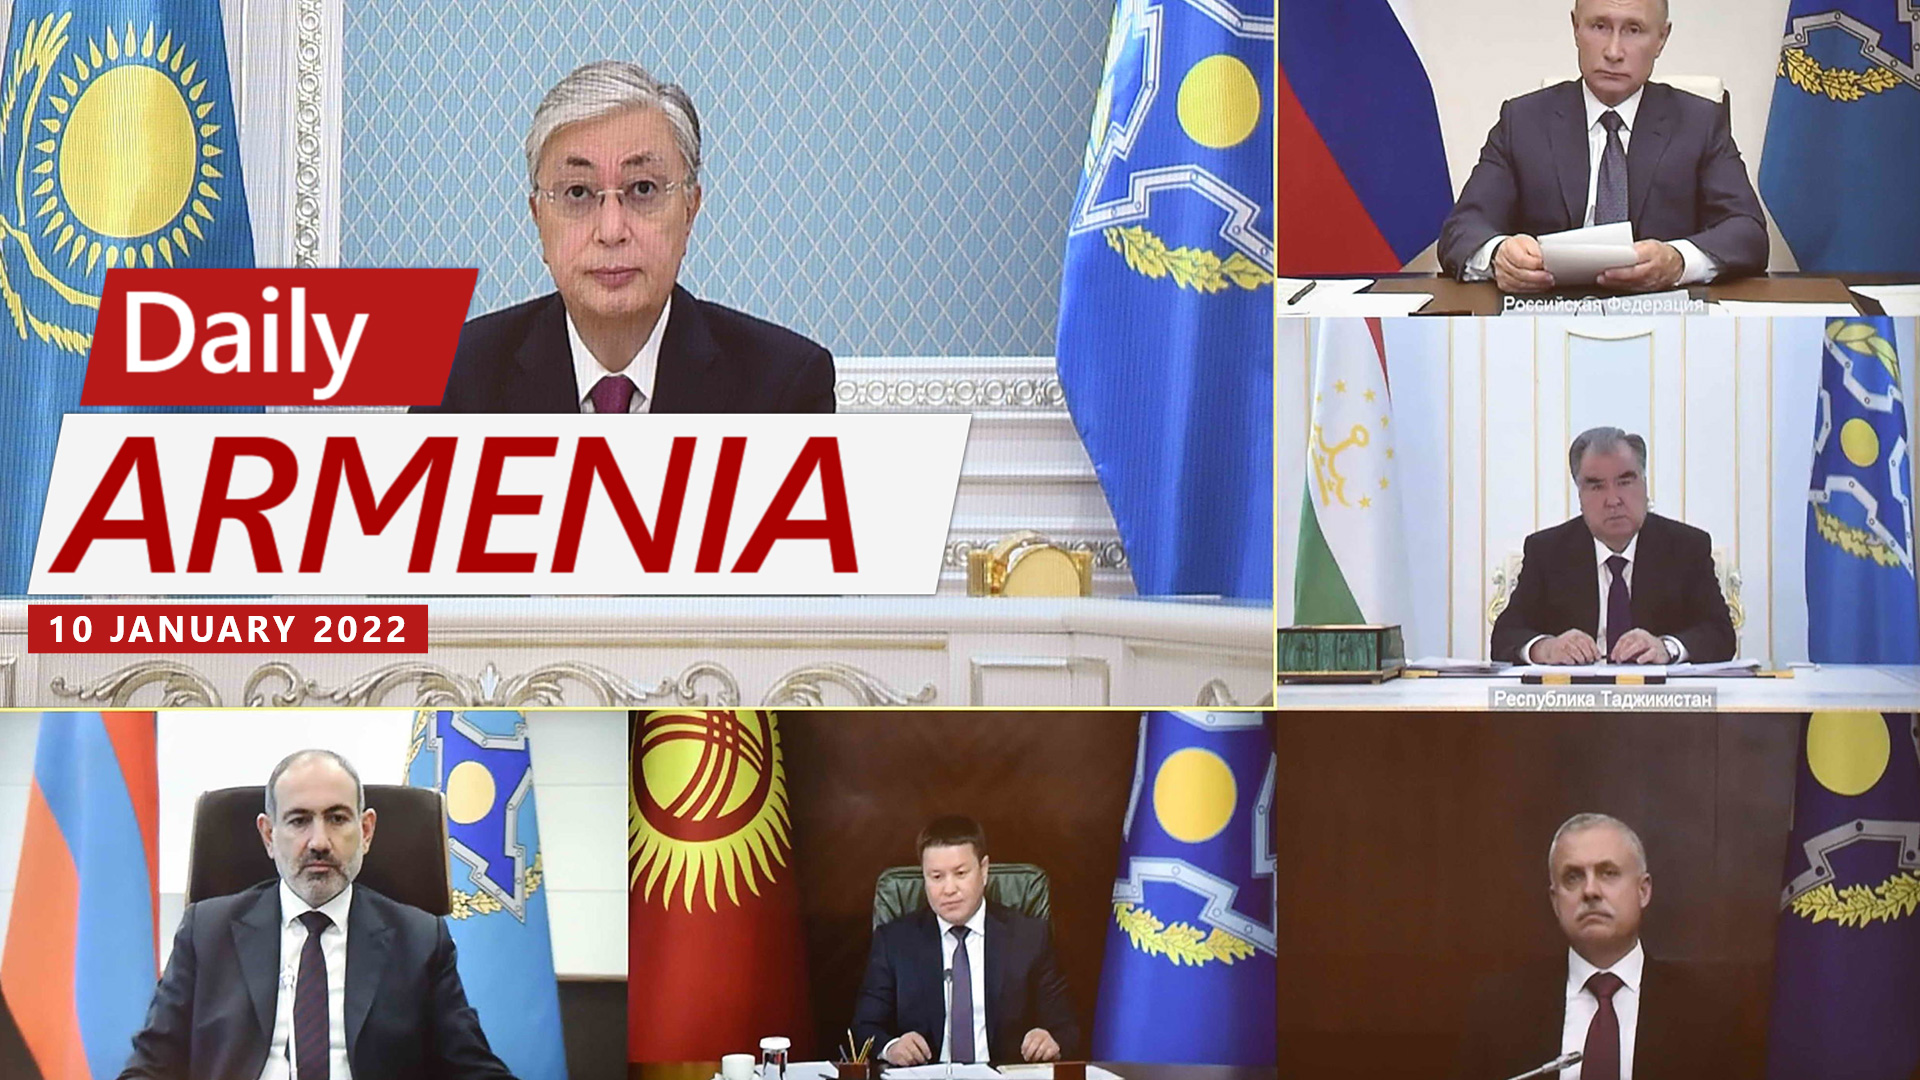 Special meeting of the CSTO chaired by Armenia addresses situation in Kazakhstan